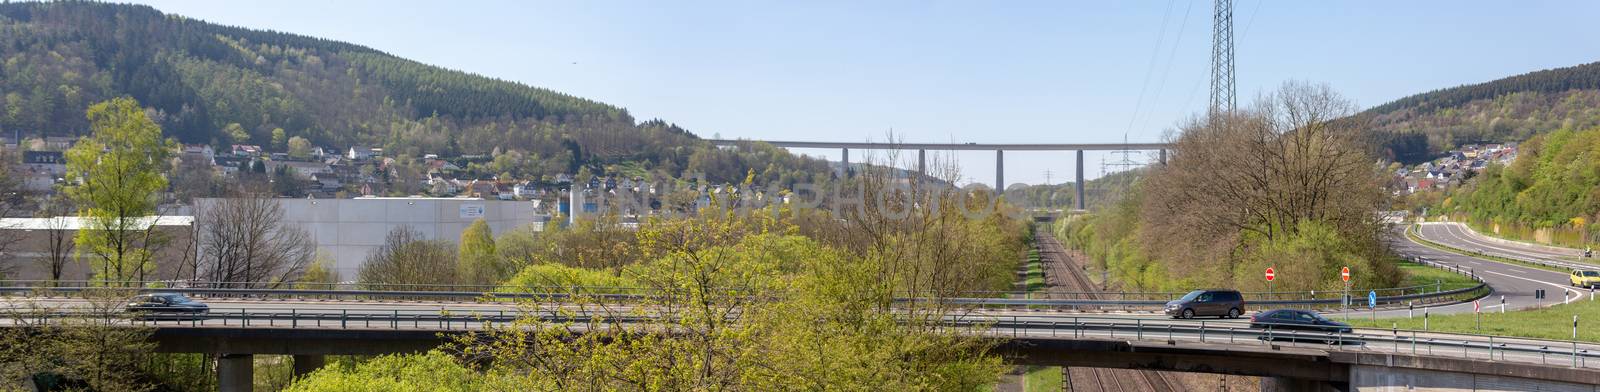 Panorama of the elevated road over a railway line by Dr-Lange